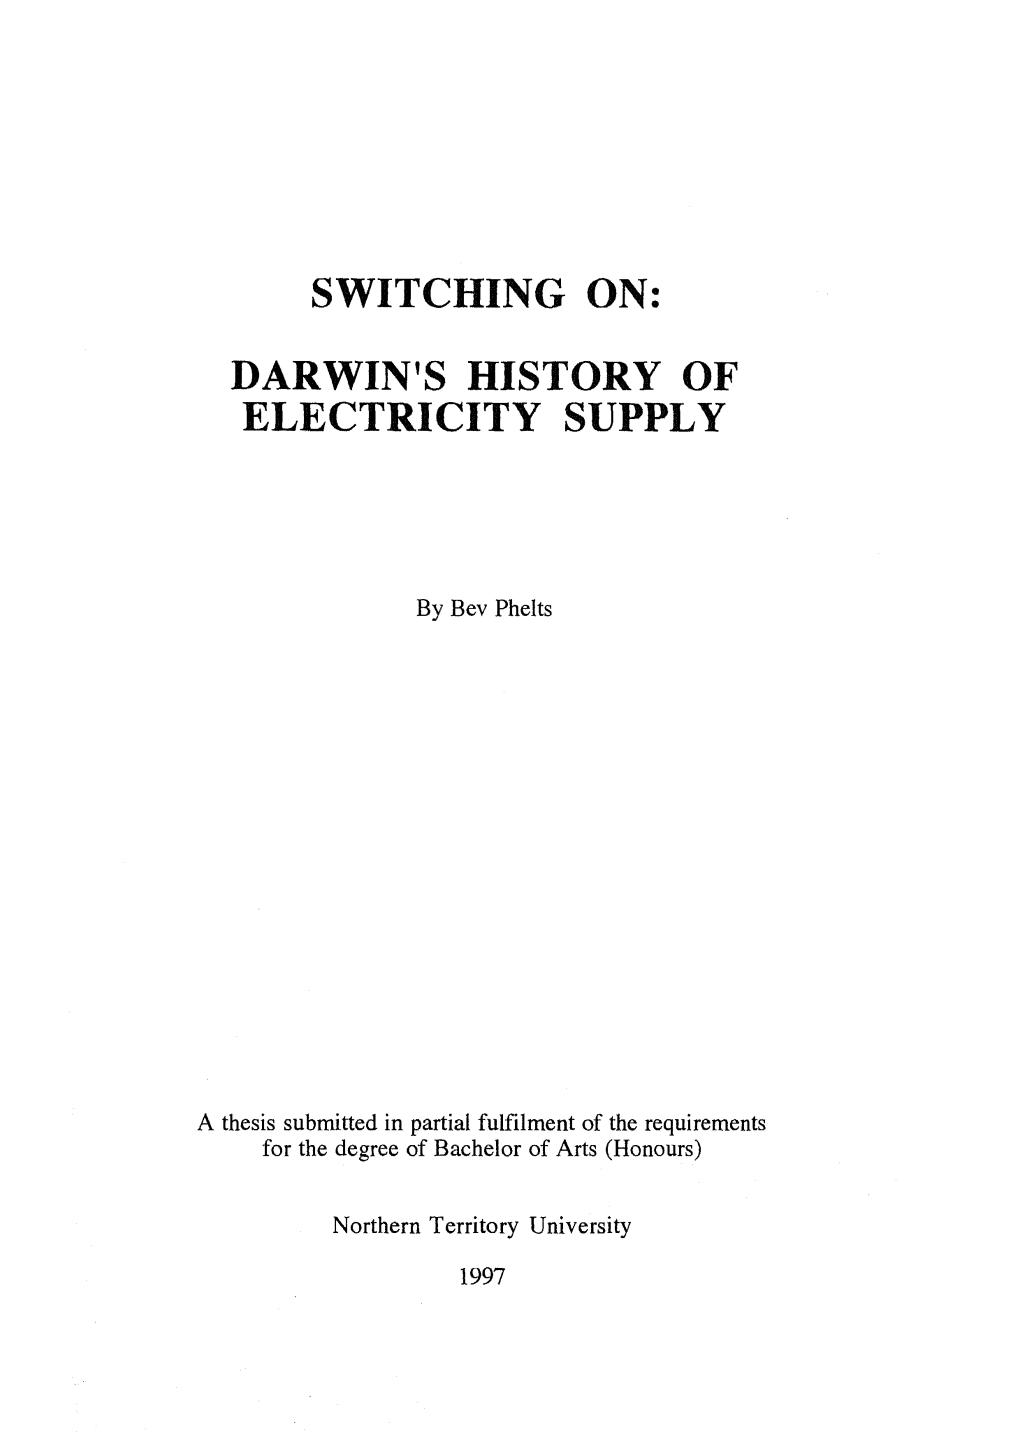 Darwin's History of Electricity Supply